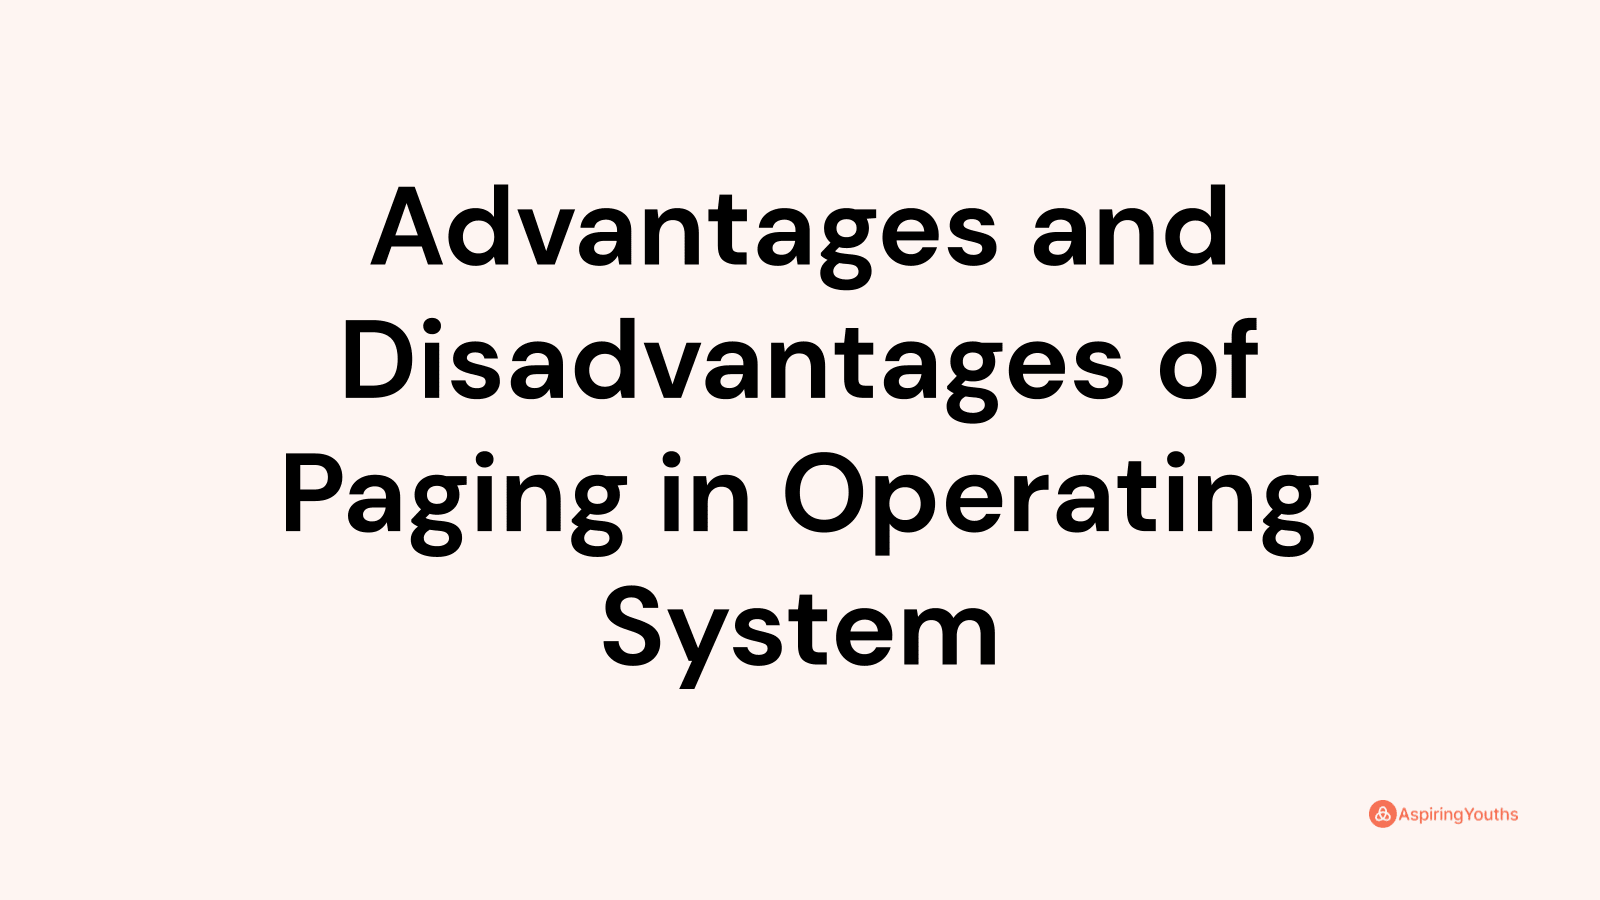 Advantages and disadvantages of Paging in Operating System